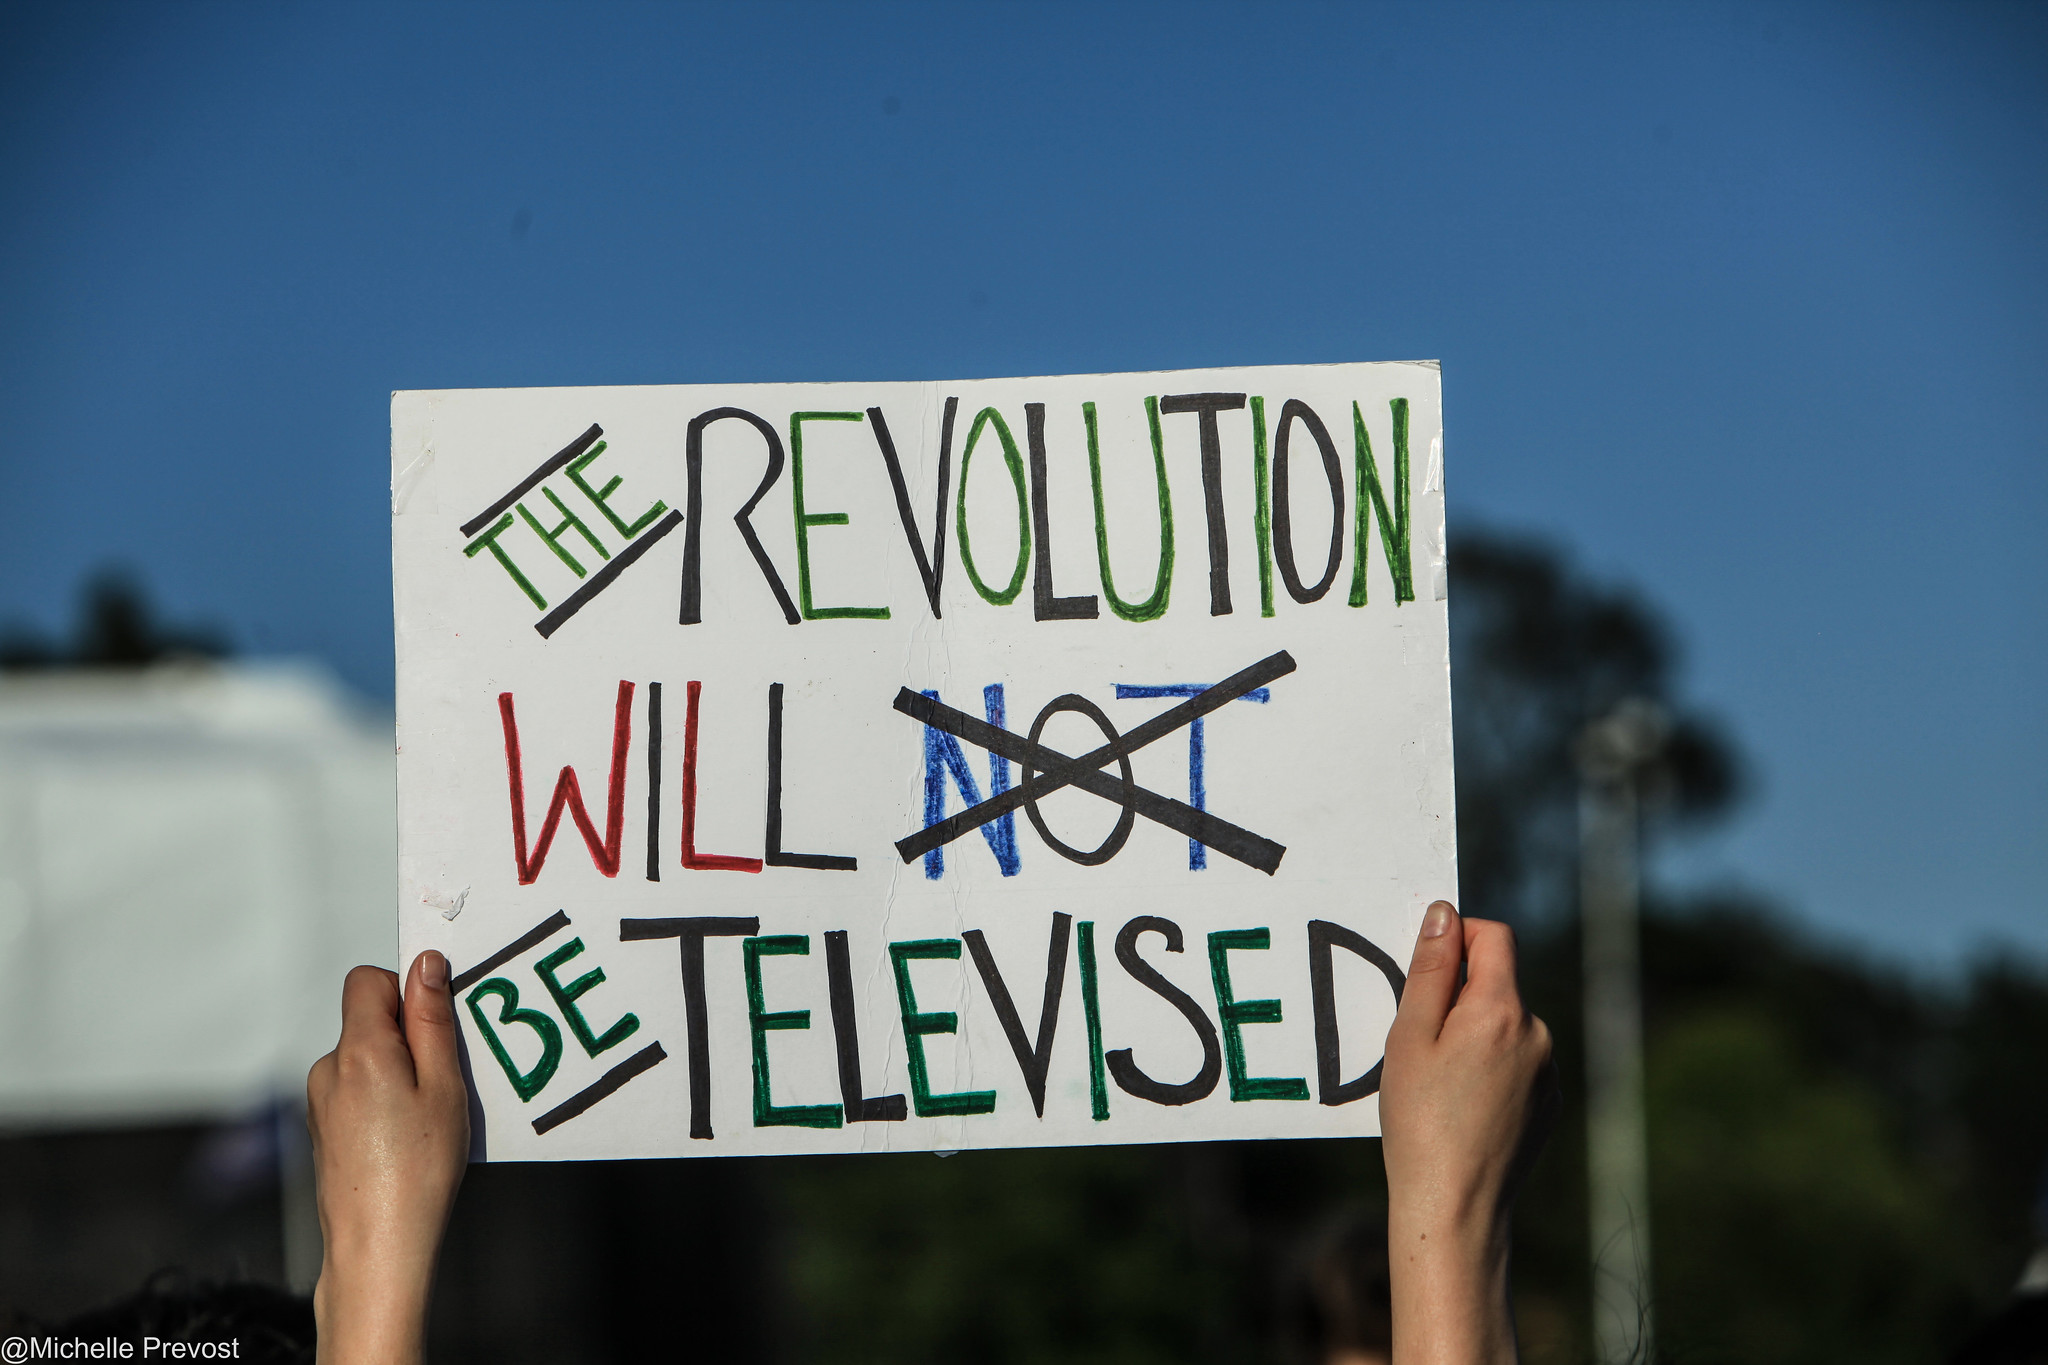 A protest sign reads 'The revolution will not be televised" with the word 'not' crossed out.